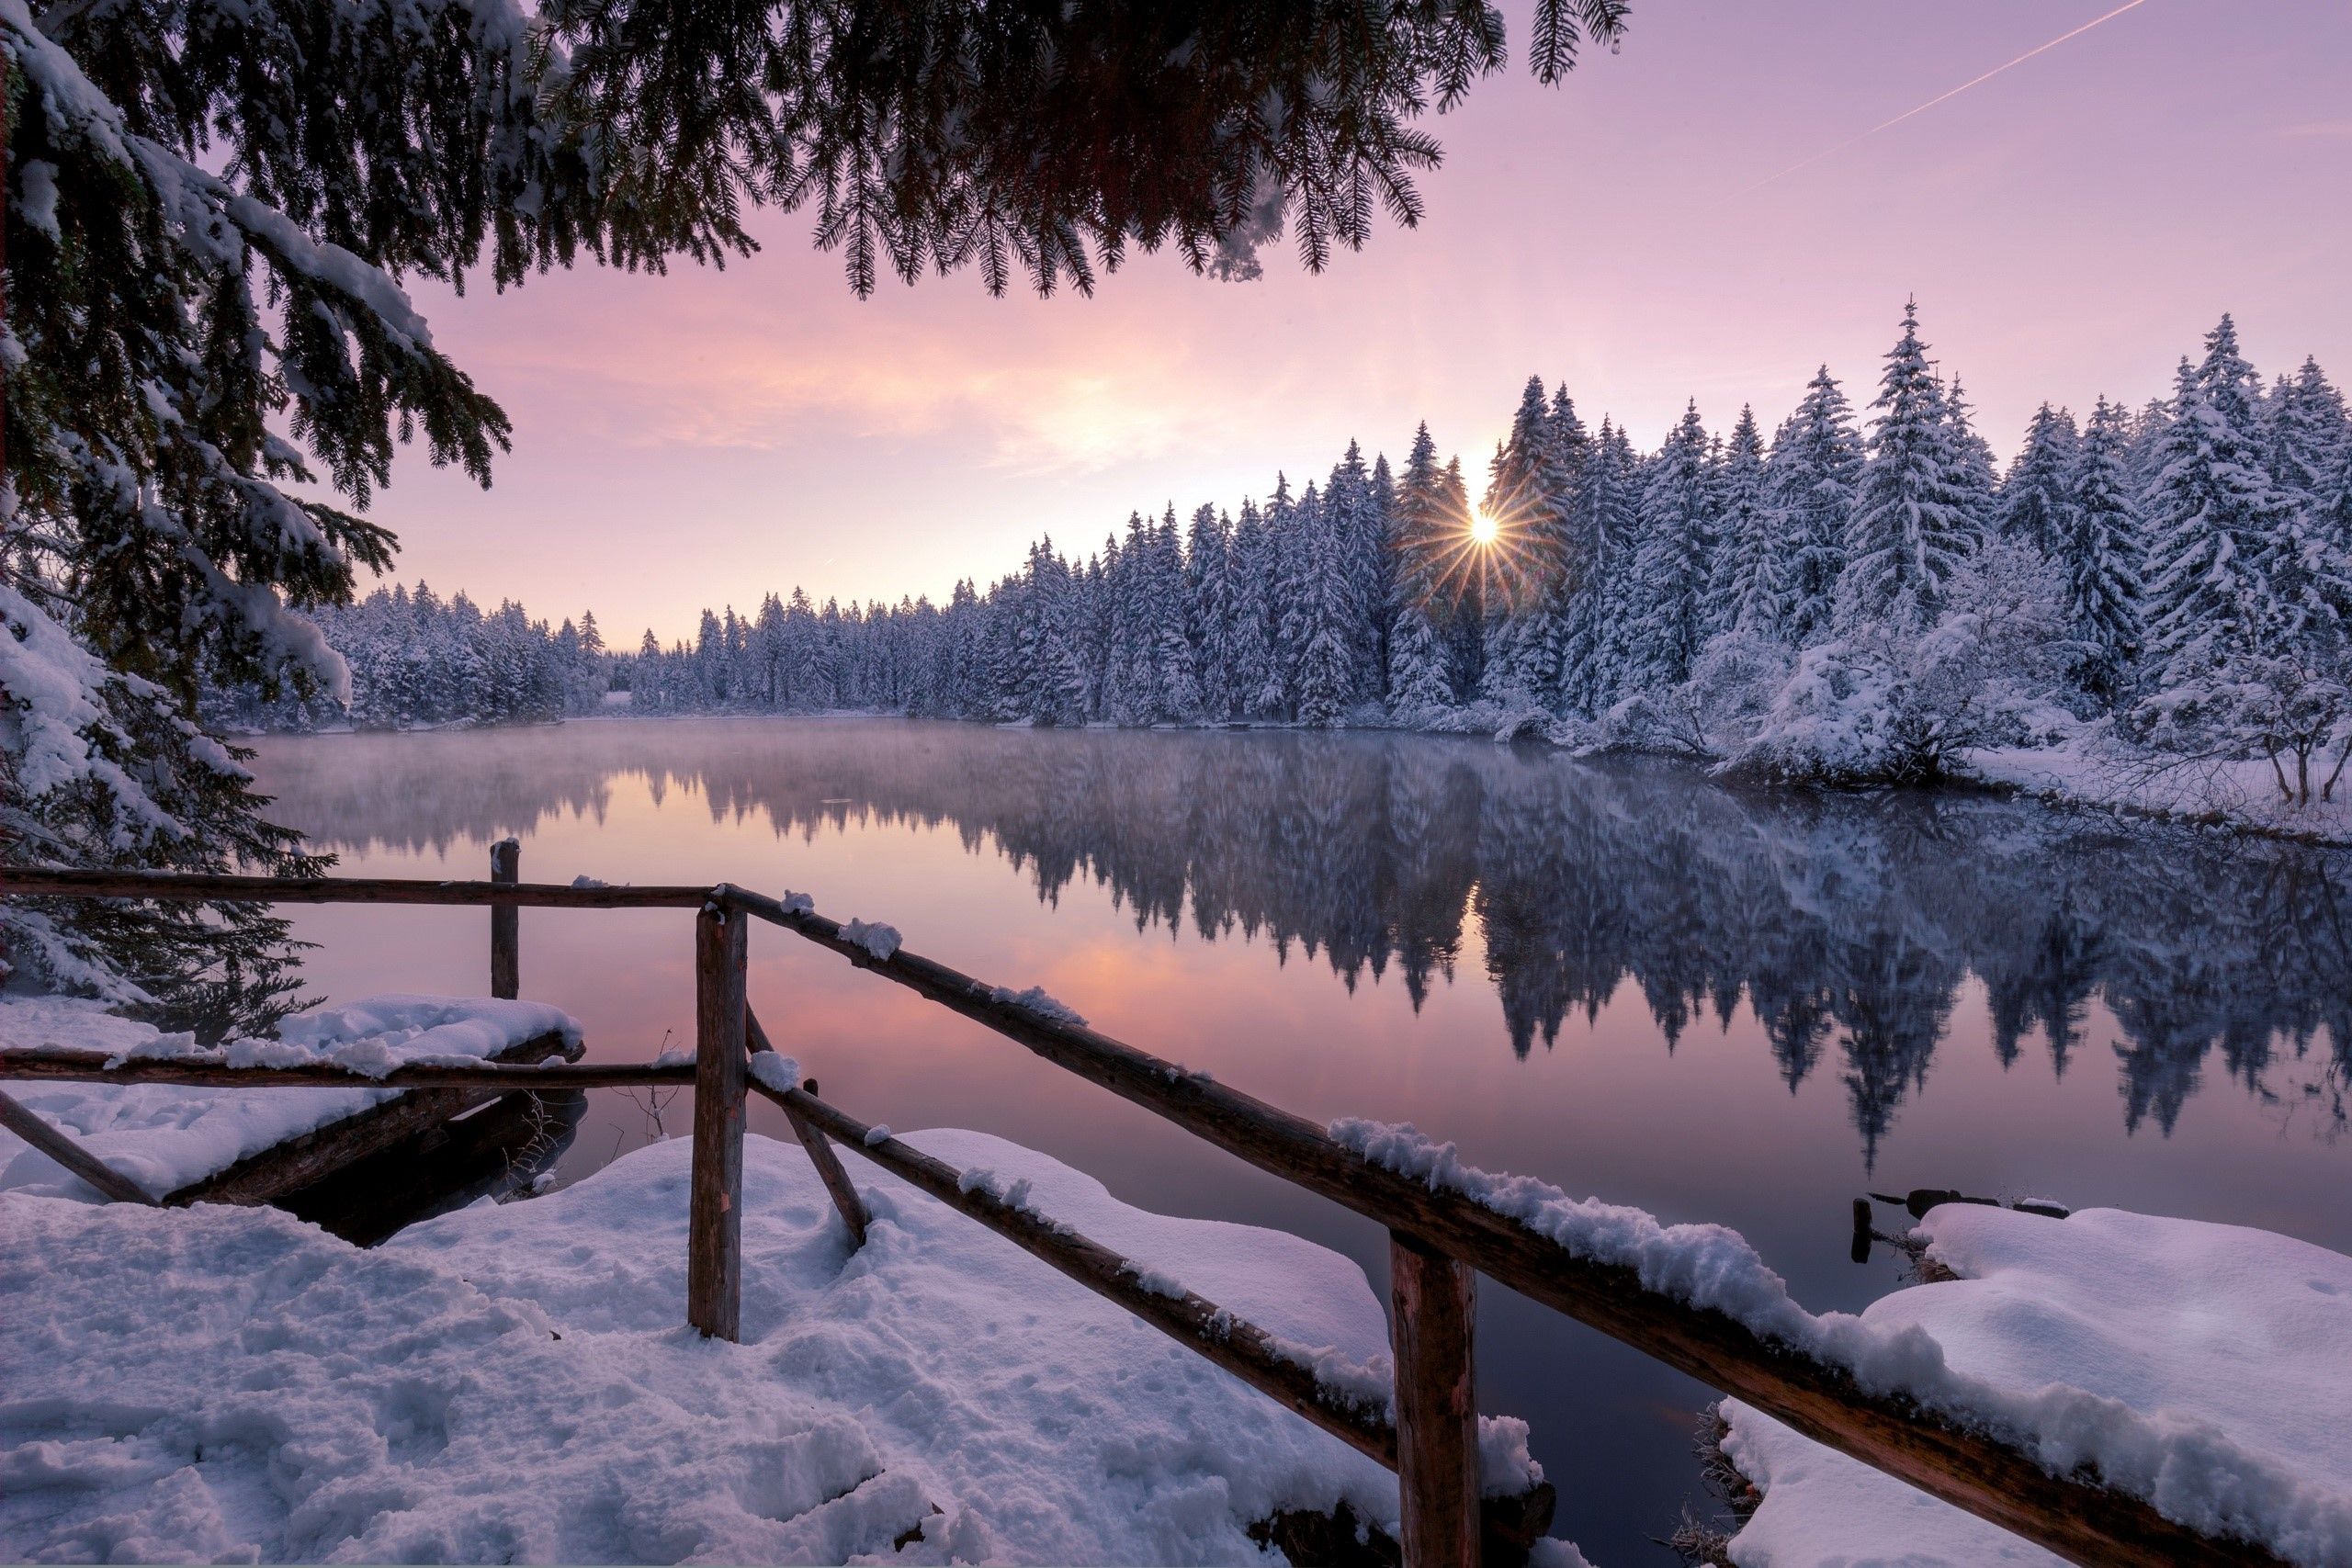 A beautiful winter sunset over a snow covered lake - Winter